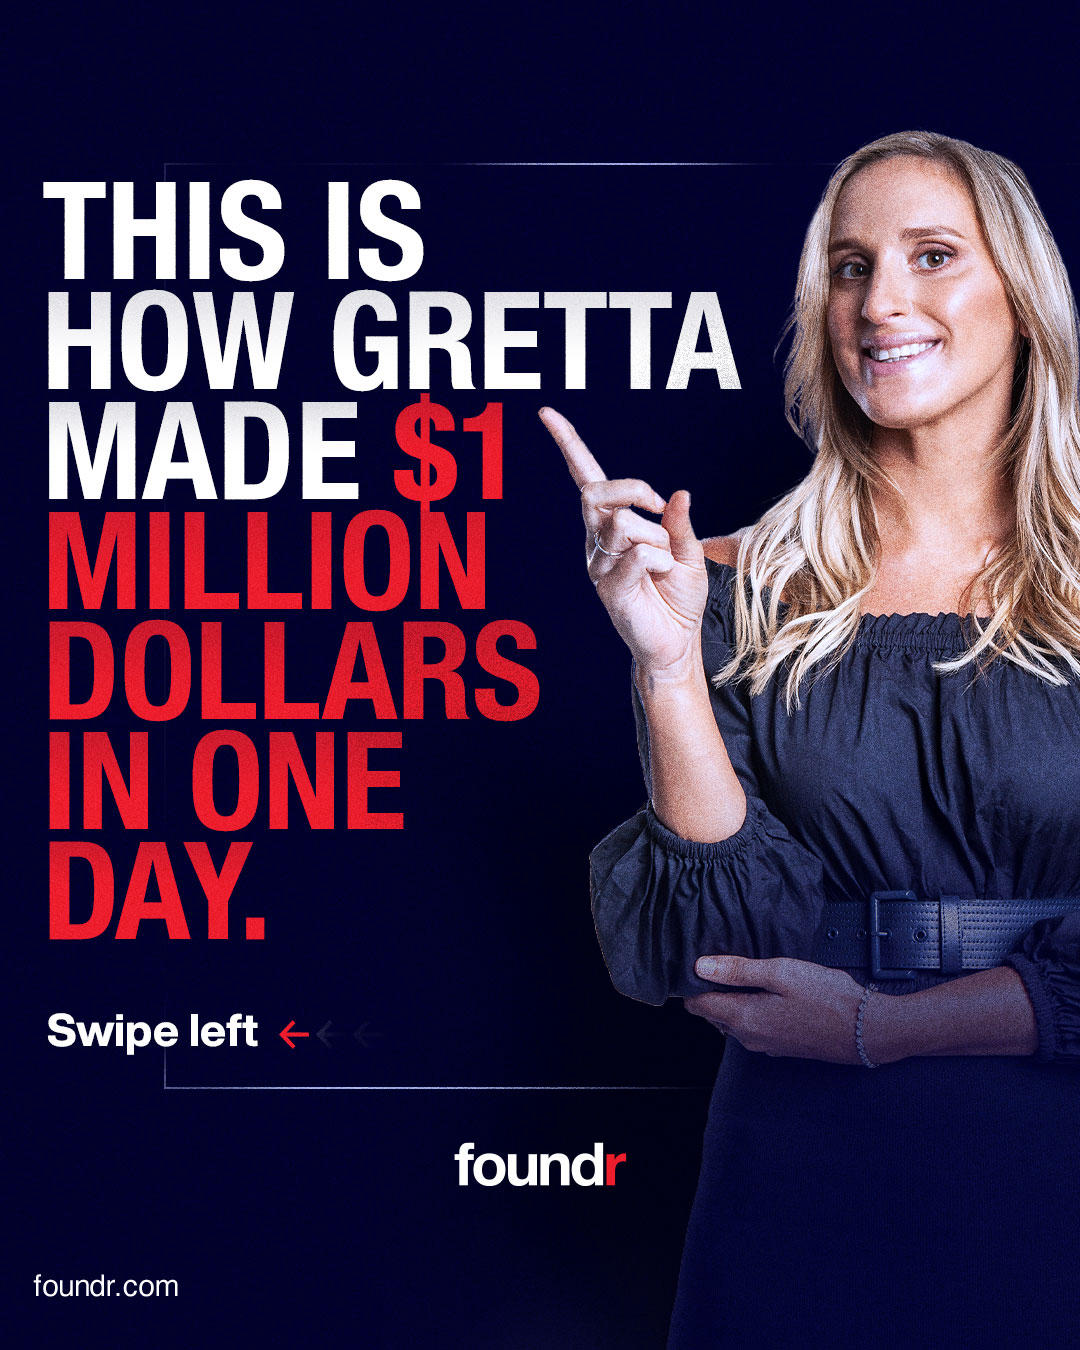 image  1 Foundr - How did #gretta Van Riel make $1 million in one day selling watches